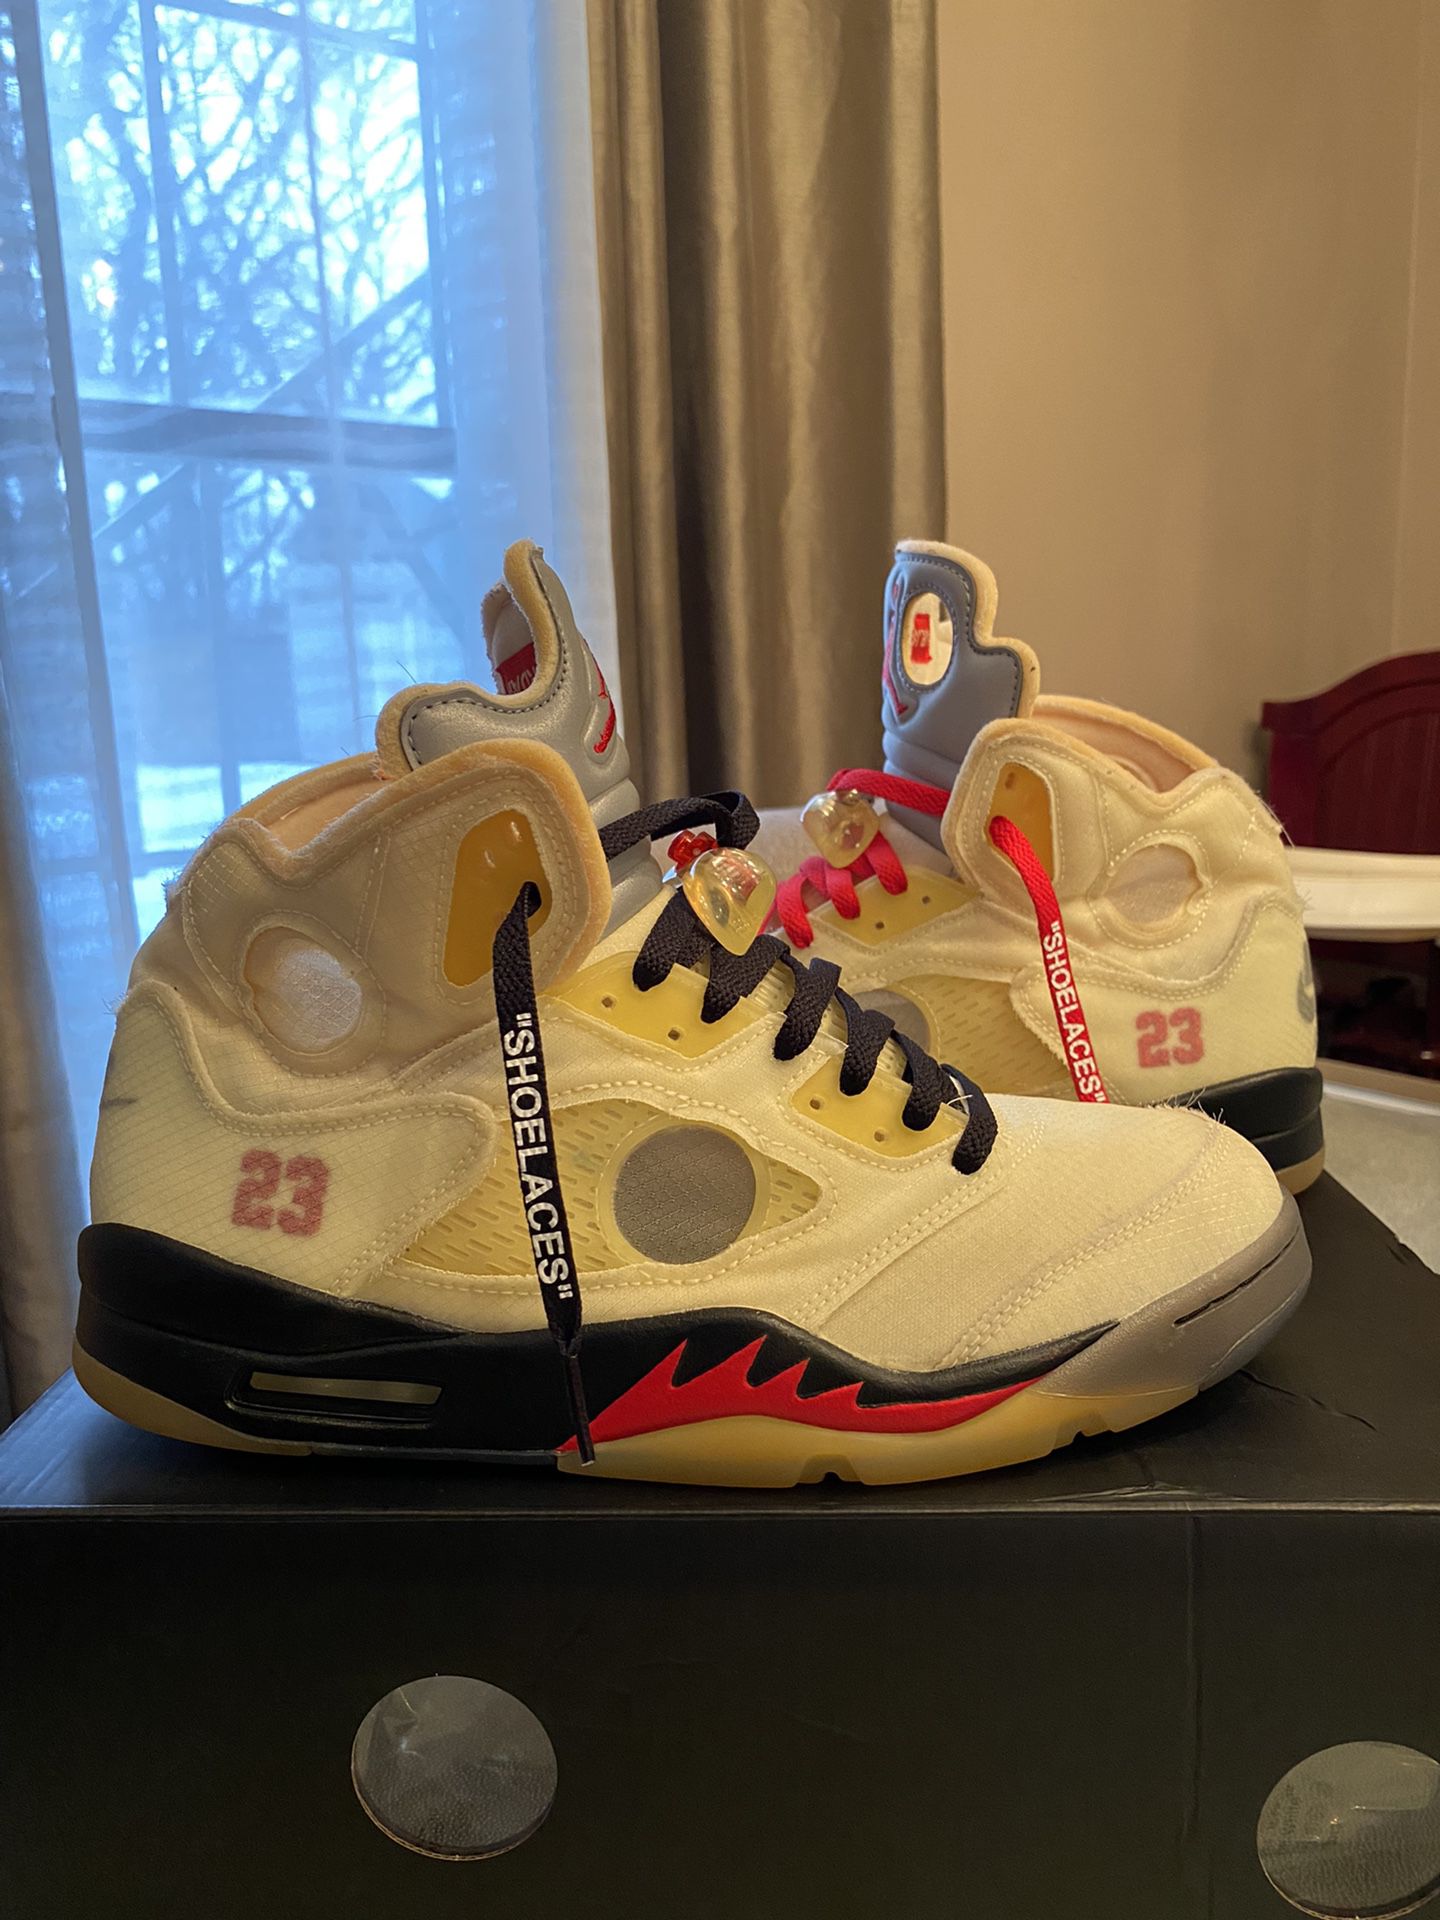 The Off White Jordan 5 Dresses Up in Sail This Season!